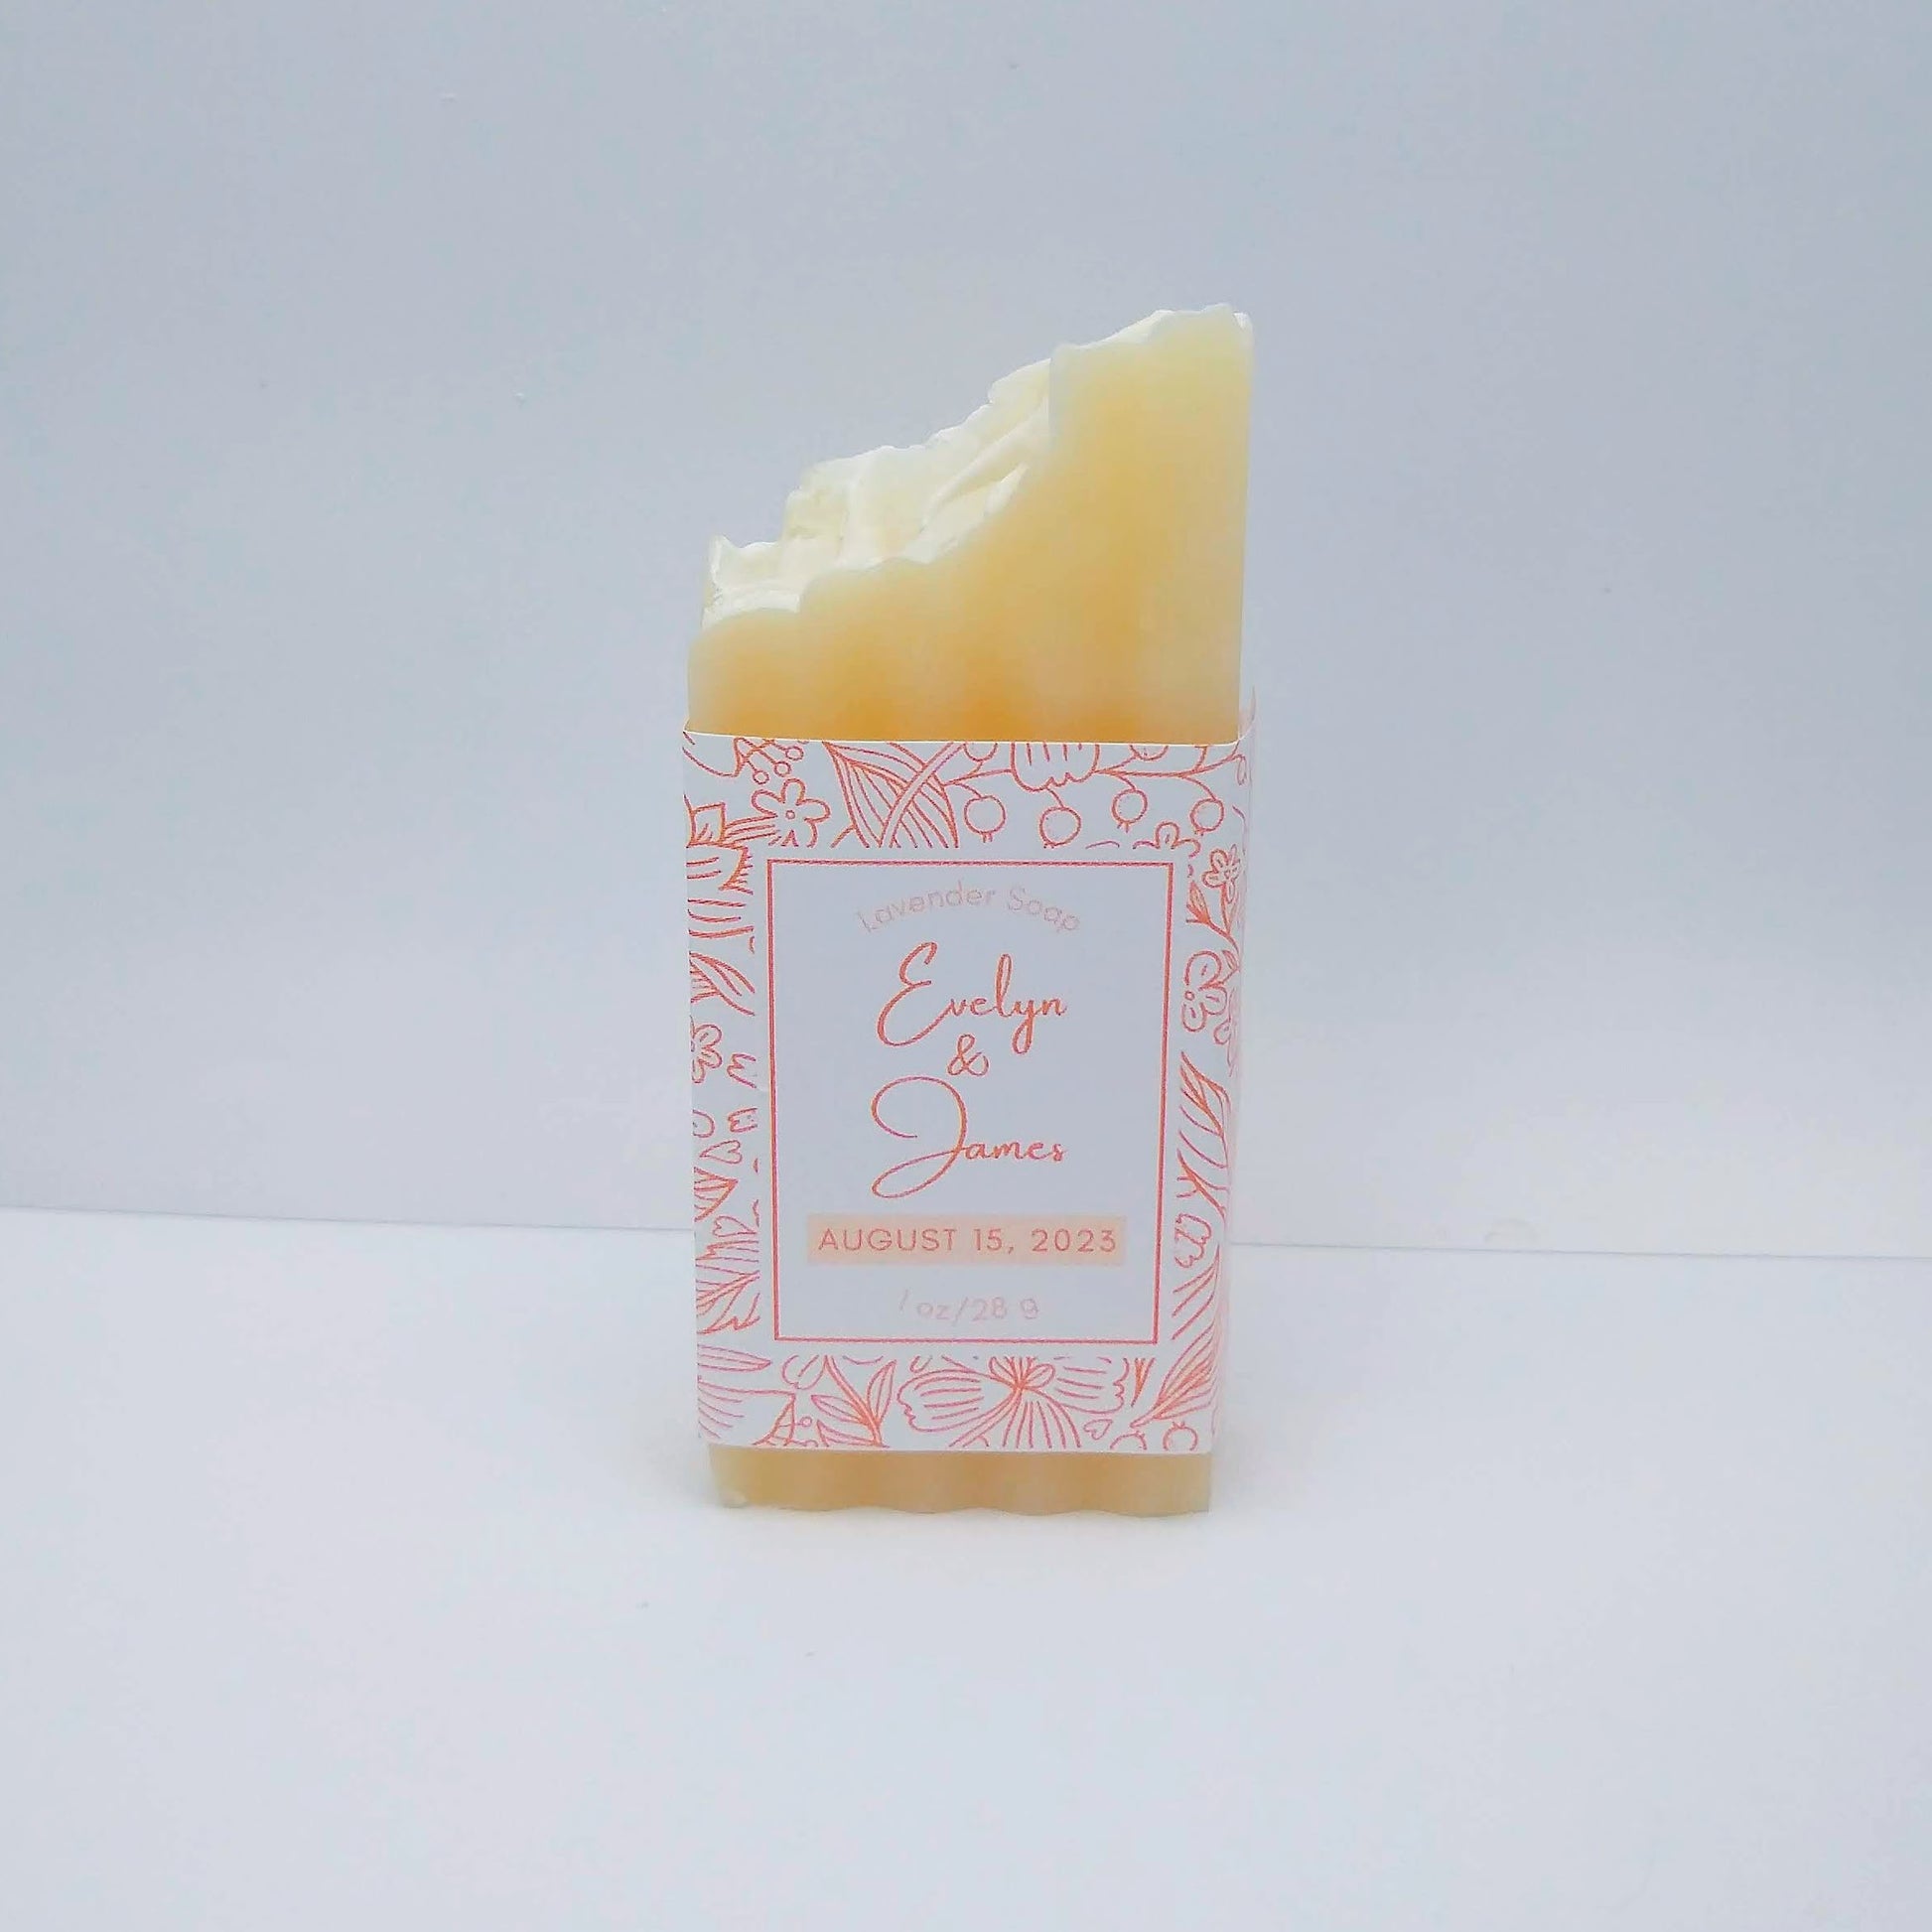 A mini bar of cream-colored soap with a light orange label printed with Evelyn & James, August 15, 2023.